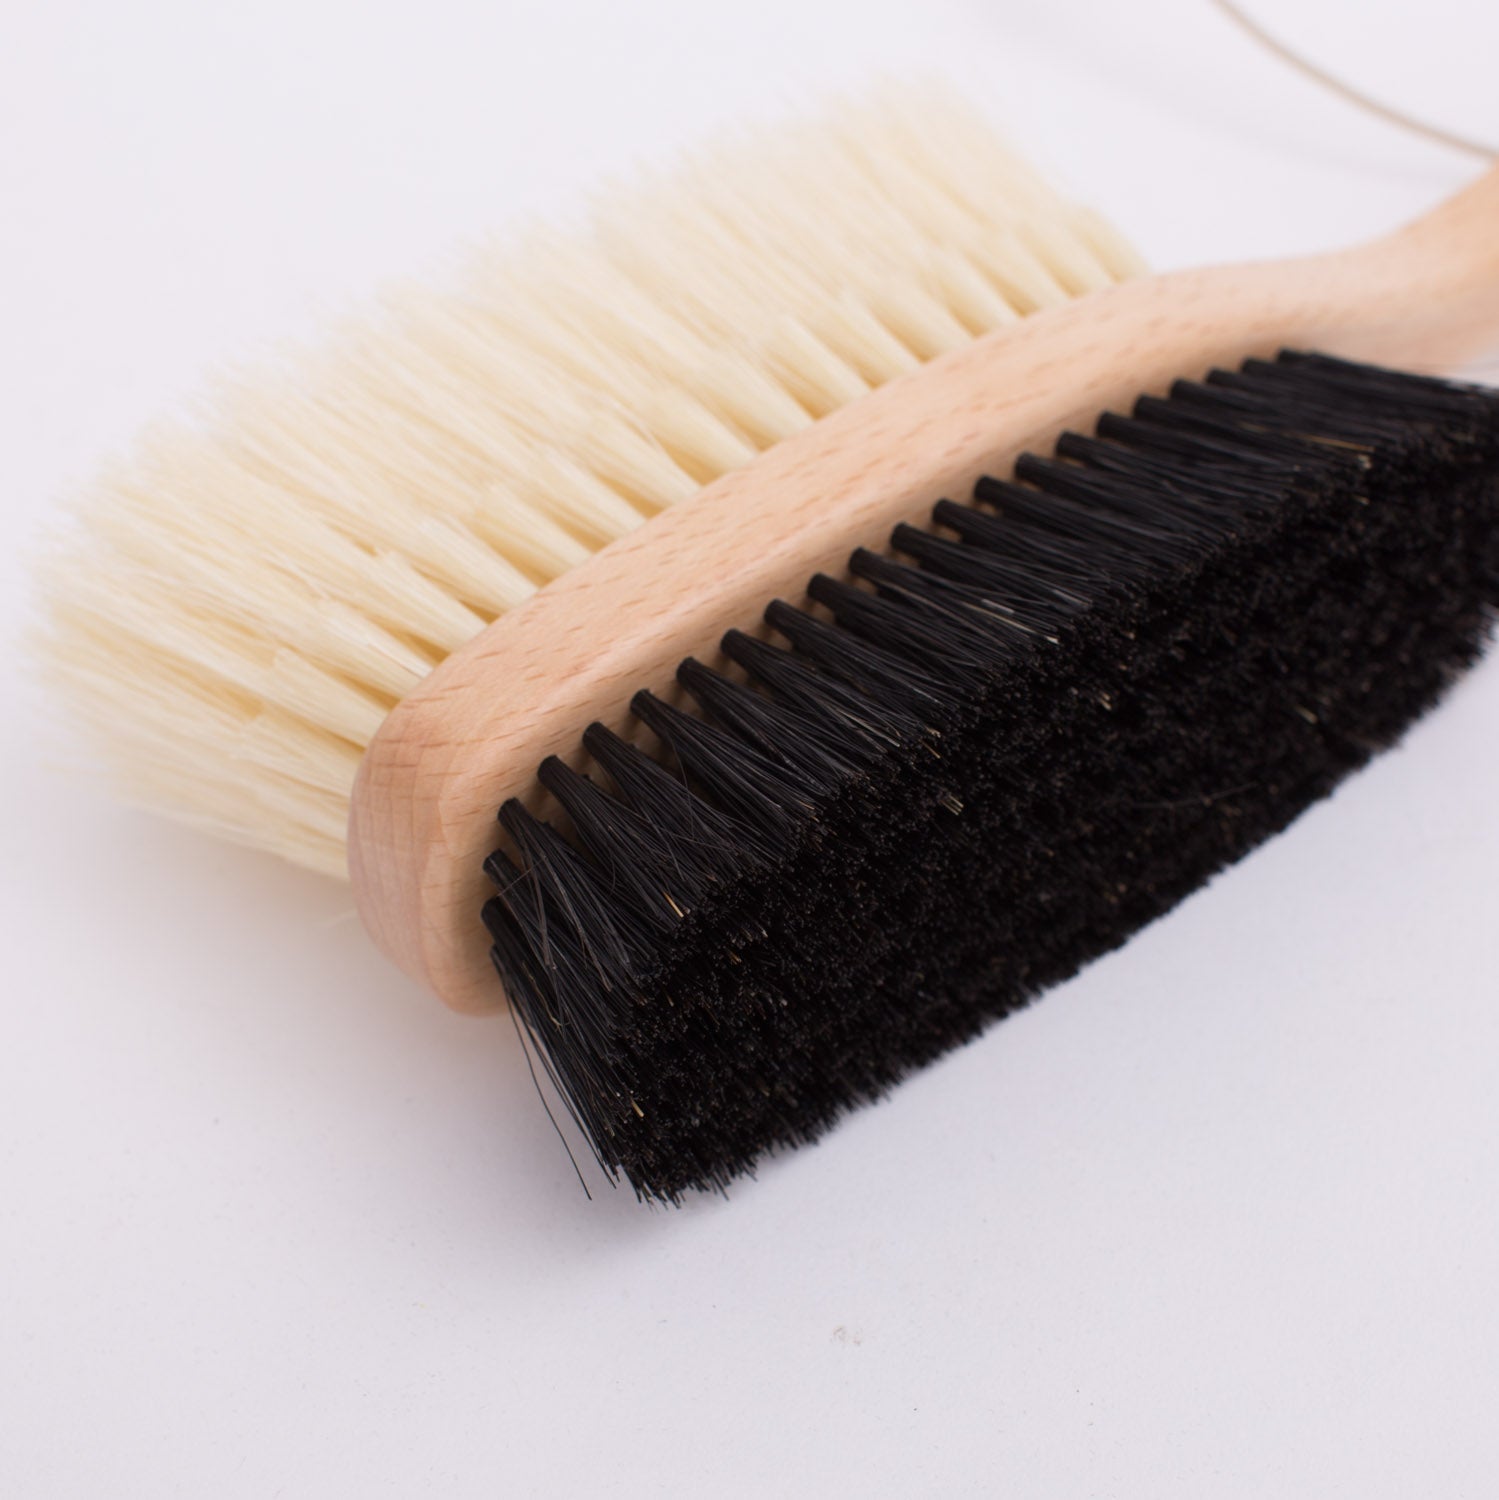 A KirbyAllison.com Hanger Project Deluxe Double-Sided Garment Brush with black bristles on a white surface.